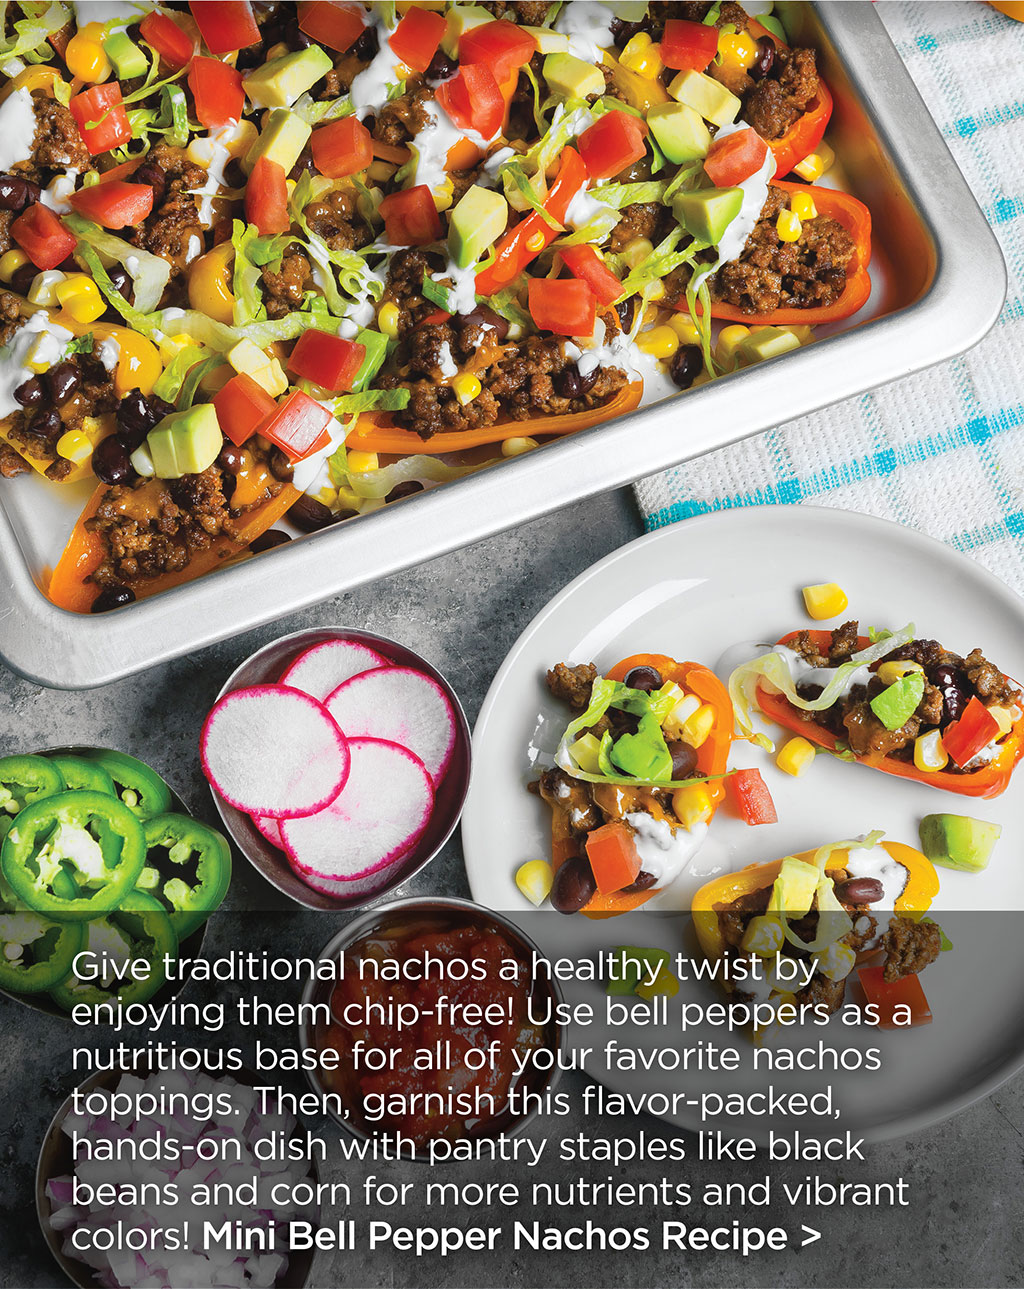 Give traditional nachos a healthy twist by enjoying them chip-free! Use bell peppers as a nutritious base for all of your favorite nachos toppings. Then, garnish this flavor-packed, hands-on dish with pantry staples like black beans and corn for more nutrients and vibrant colors! Mini Bell Pepper Nachos Recipe >